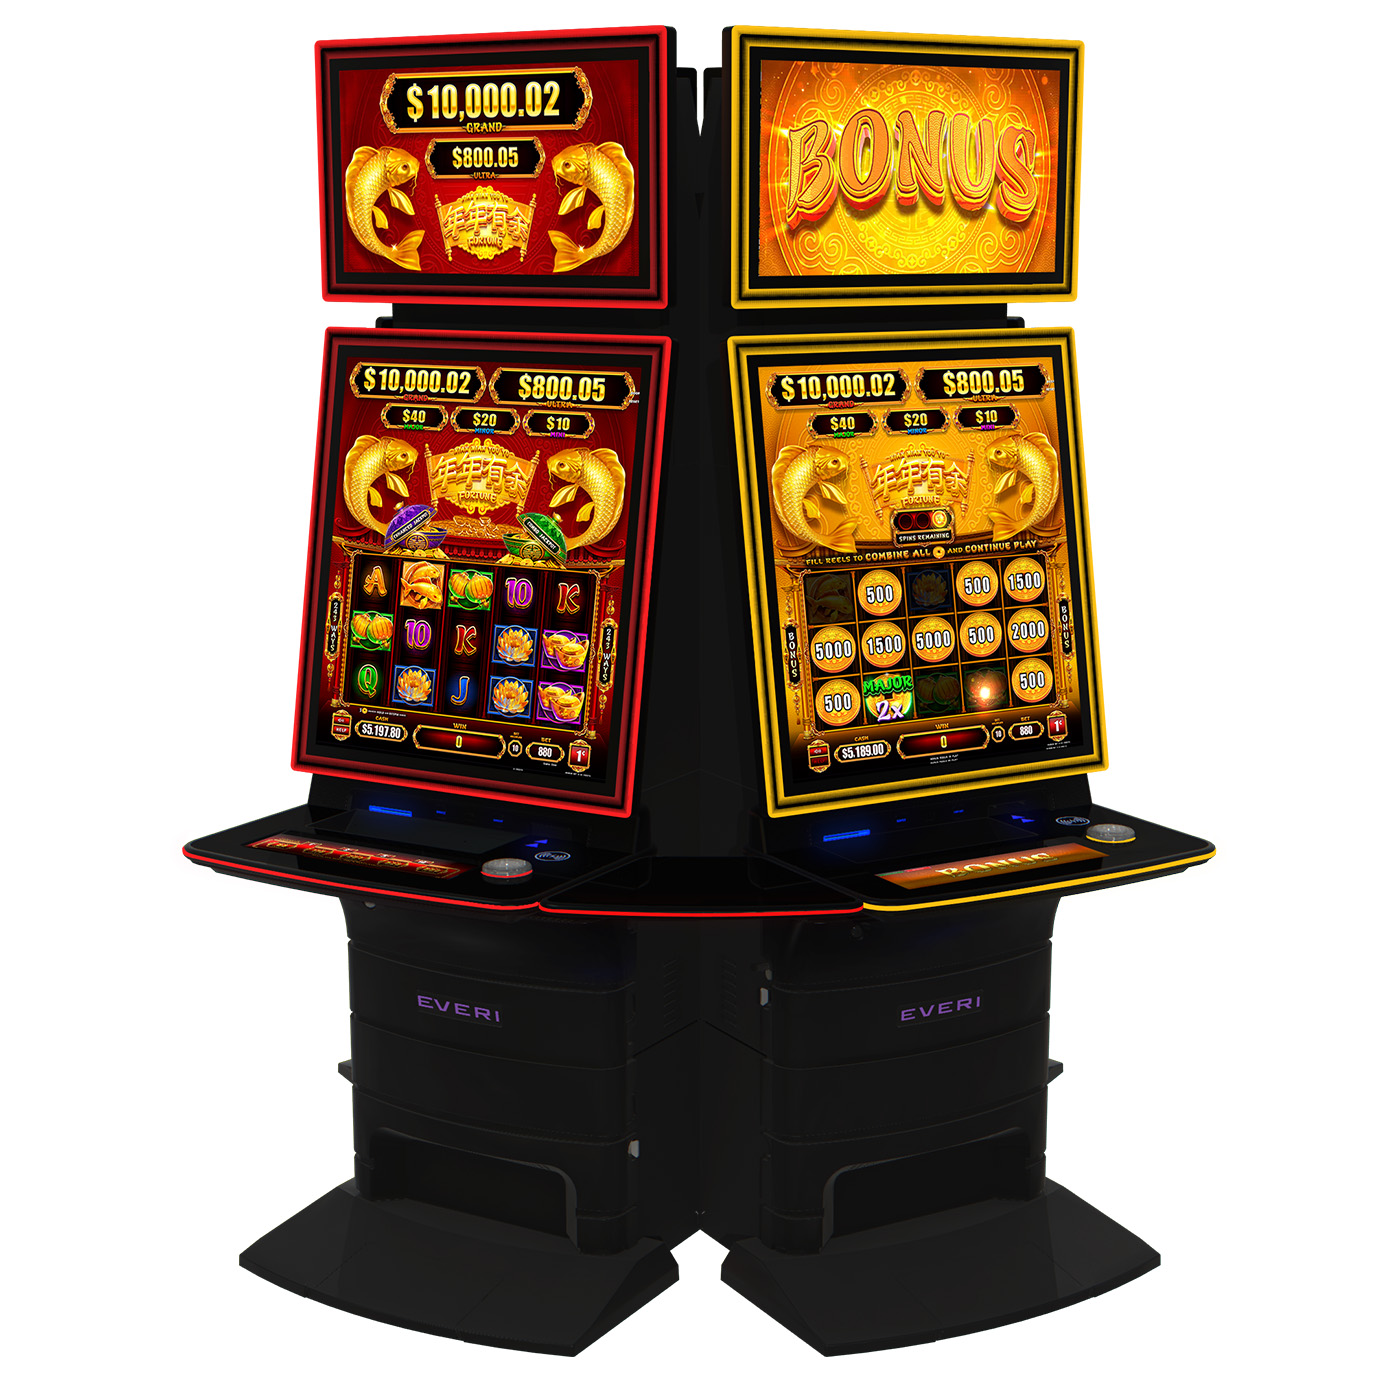 Nian Nian You Yu™ Series is available on the innovative Dynasty Vue™ cabinet and consist of two base themes, Fortune and Prosperity, that feature two accumulators, three progressive pick bonuses, and a familiar hold-and-spin style bonus, but with a twist!